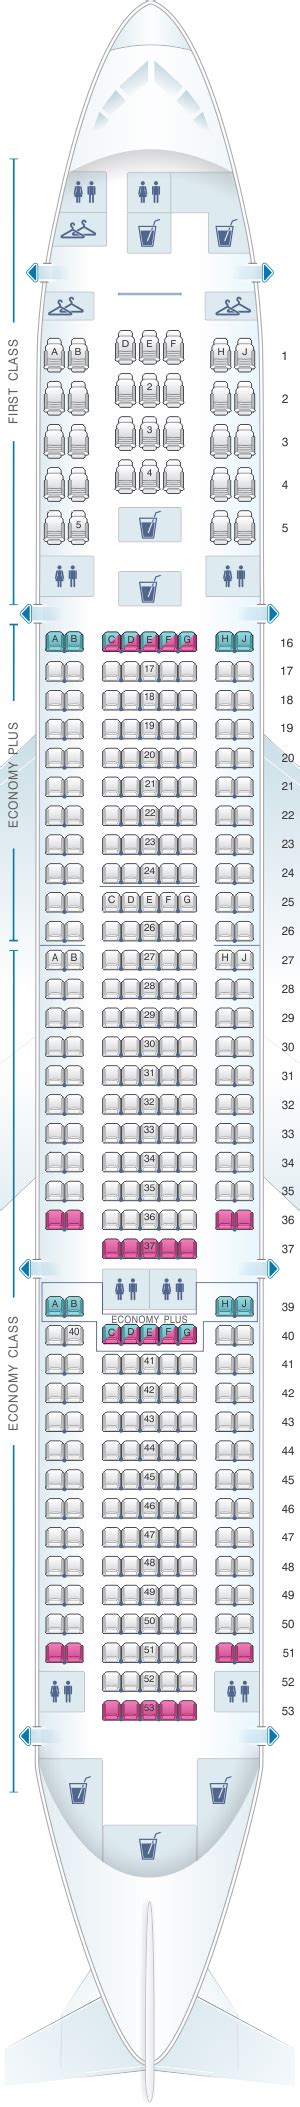 The seats 31ADC and 32DEF in the United 757-300 sea